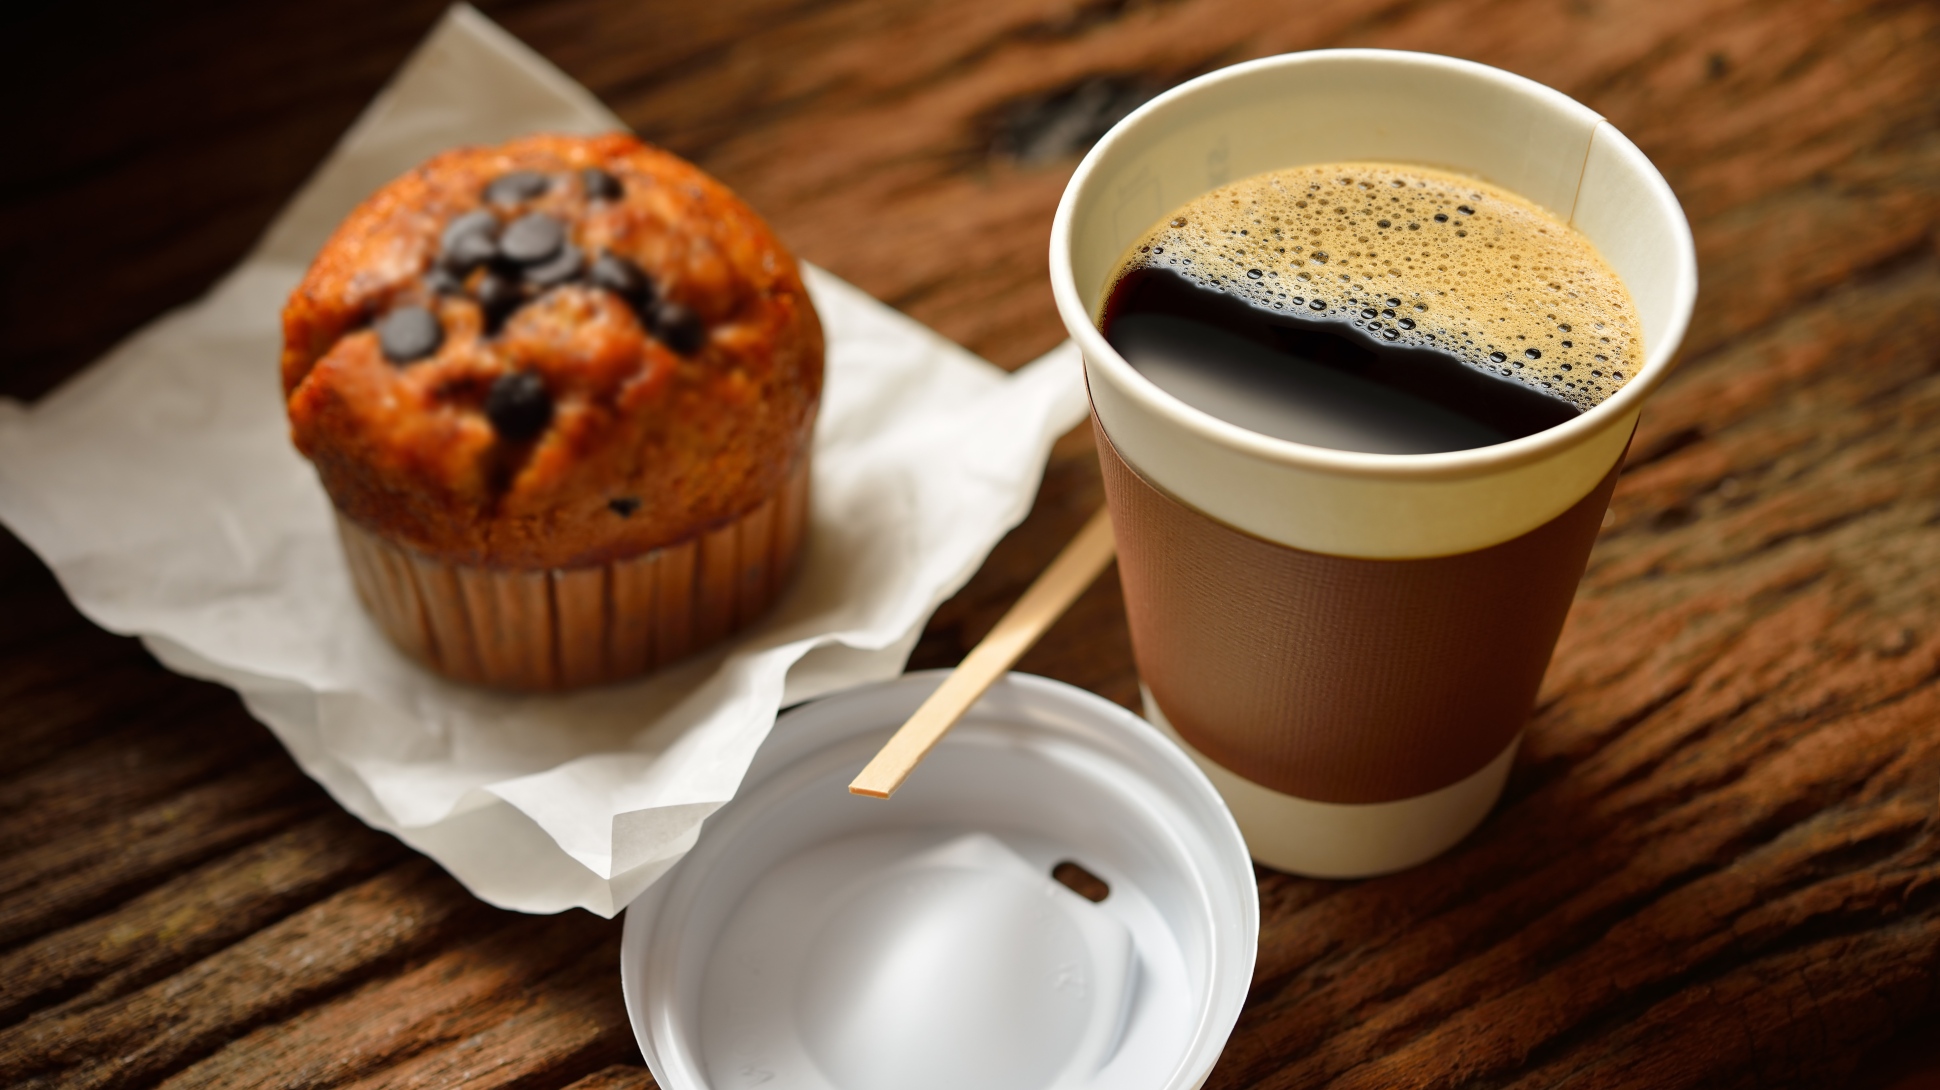 A muffin and a cup of coffee